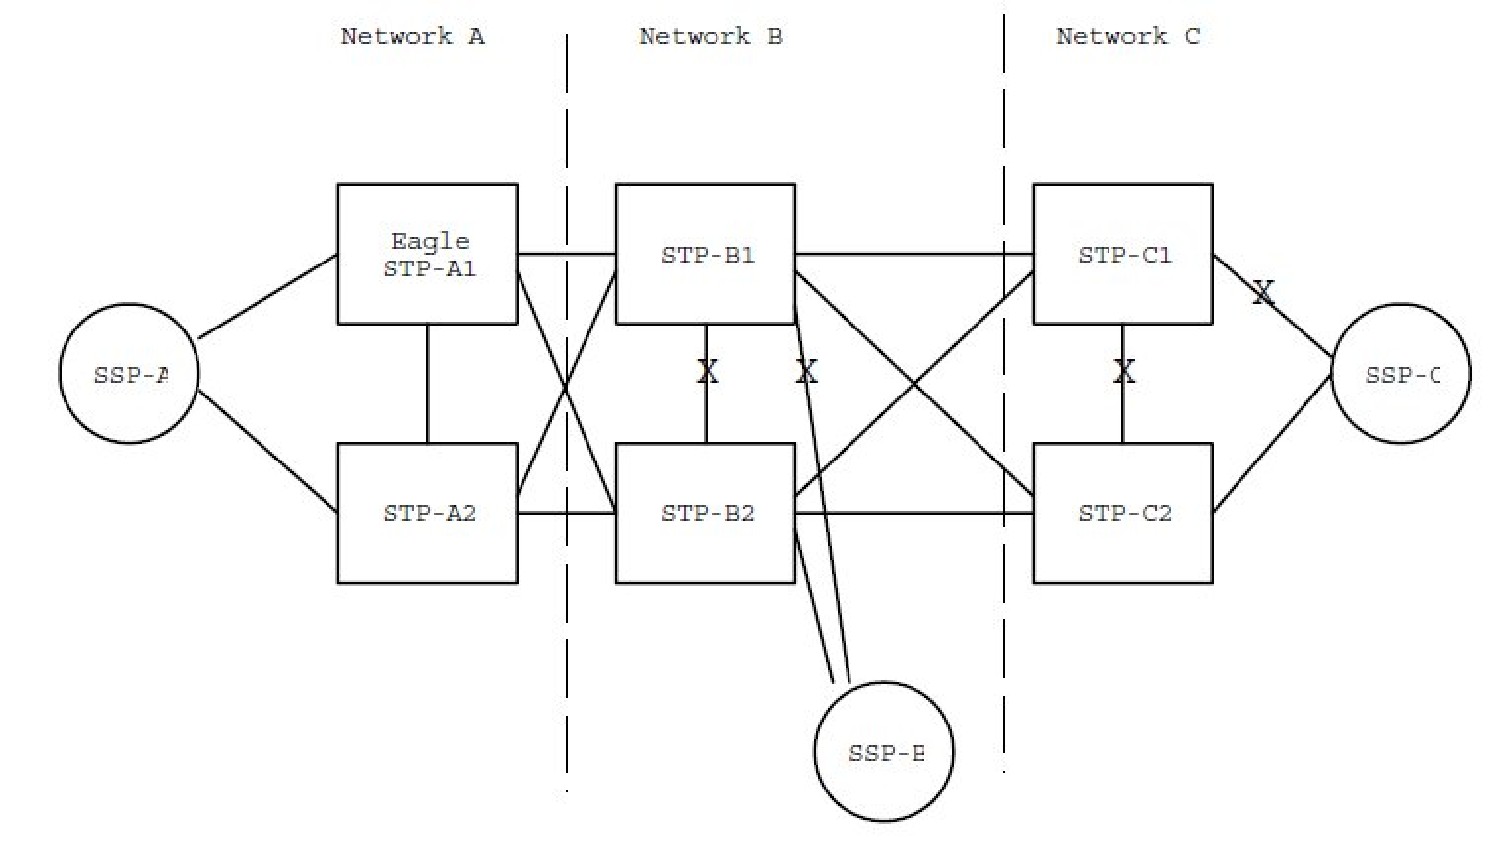 img/c_network_routing_release_26_0_prf-fig1.jpg